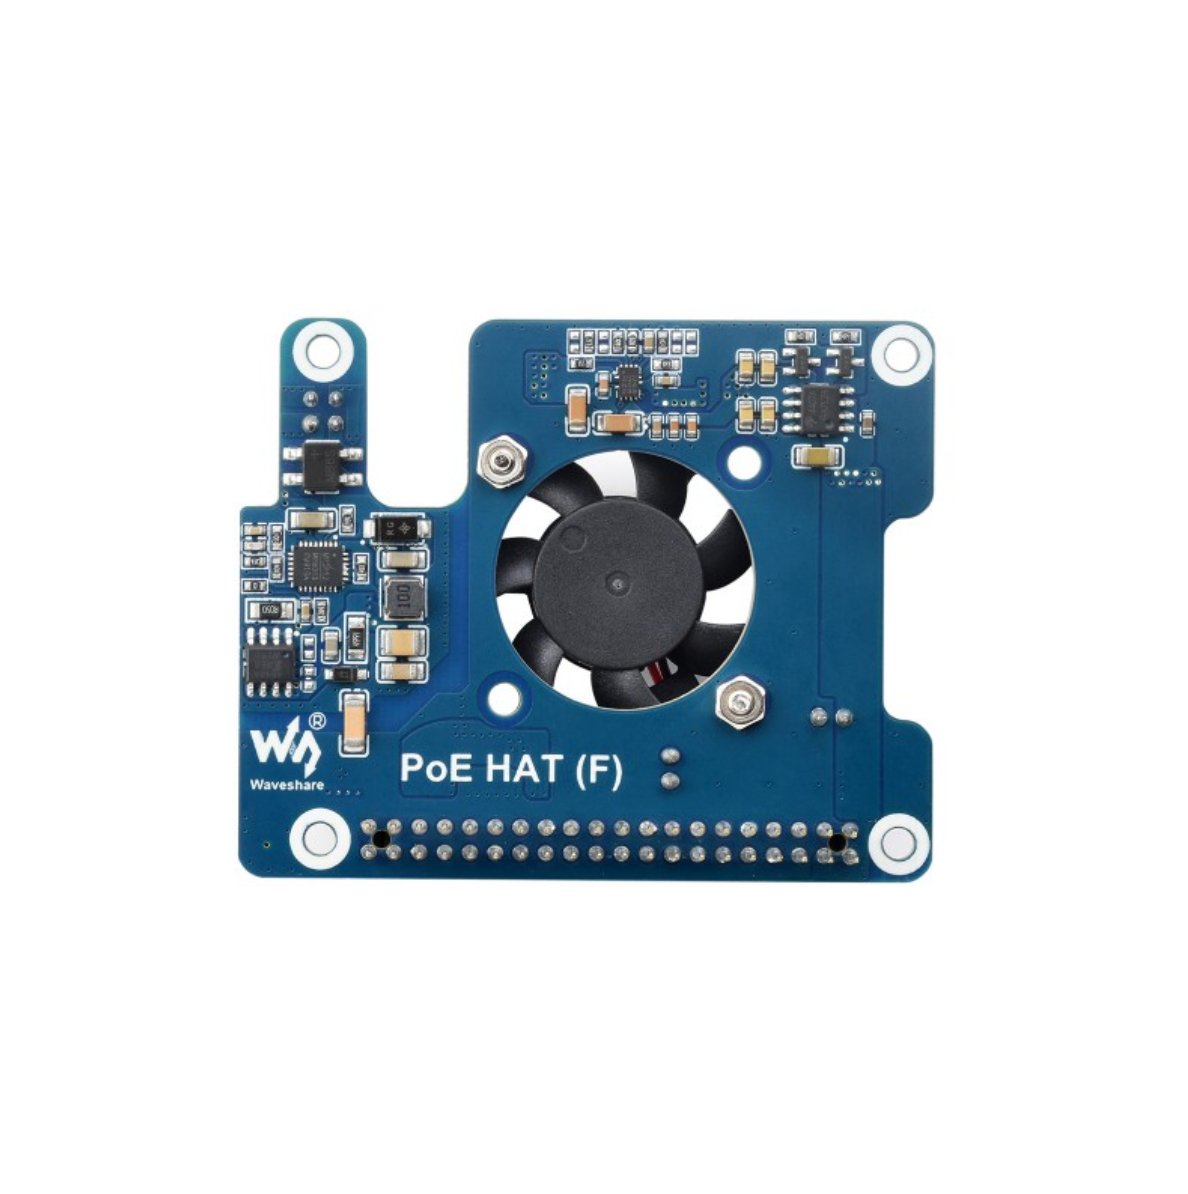 Power Over Ethernet HAT (F) For Raspberry Pi 5, High Power, Onboard Cooling Fan, With Metal Heatsink, Supports 802.3af/at network standard